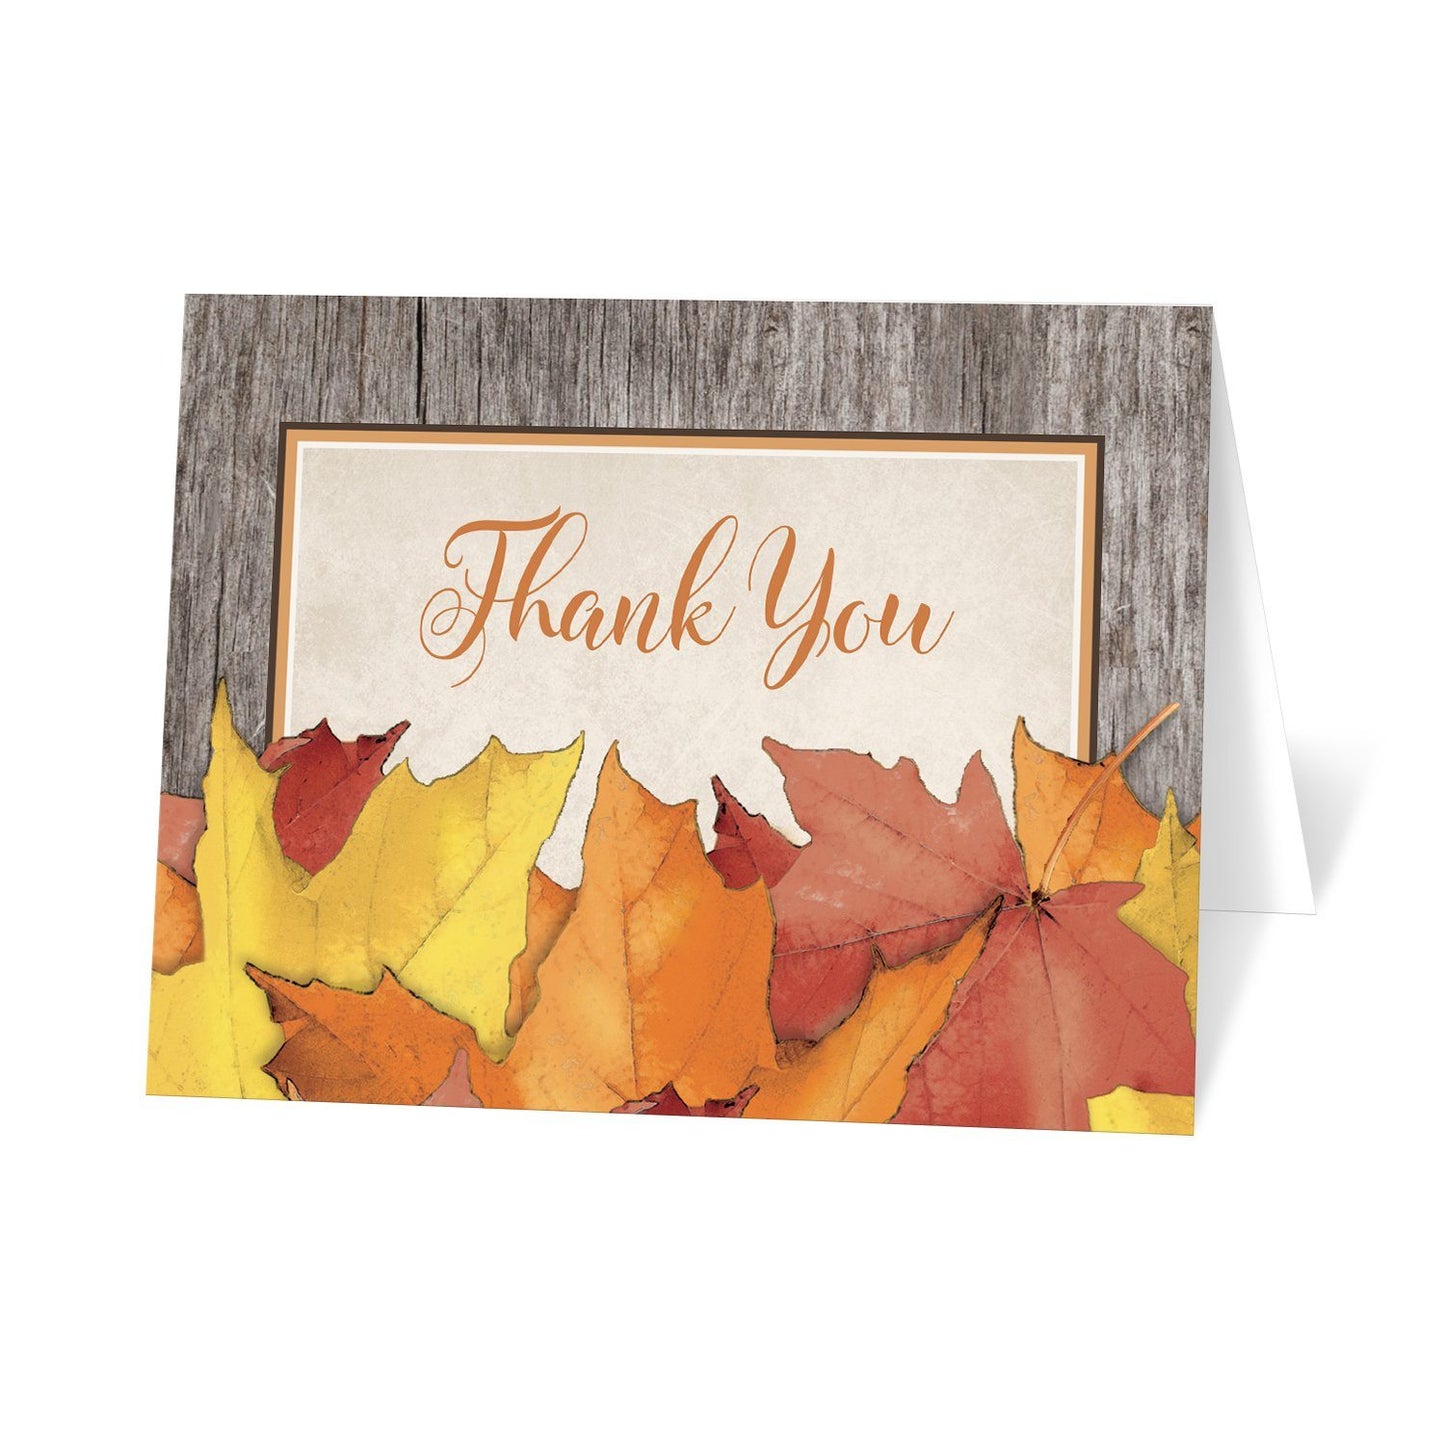 Rustic Wood and Leaves Fall Thank You Cards at Artistically Invited